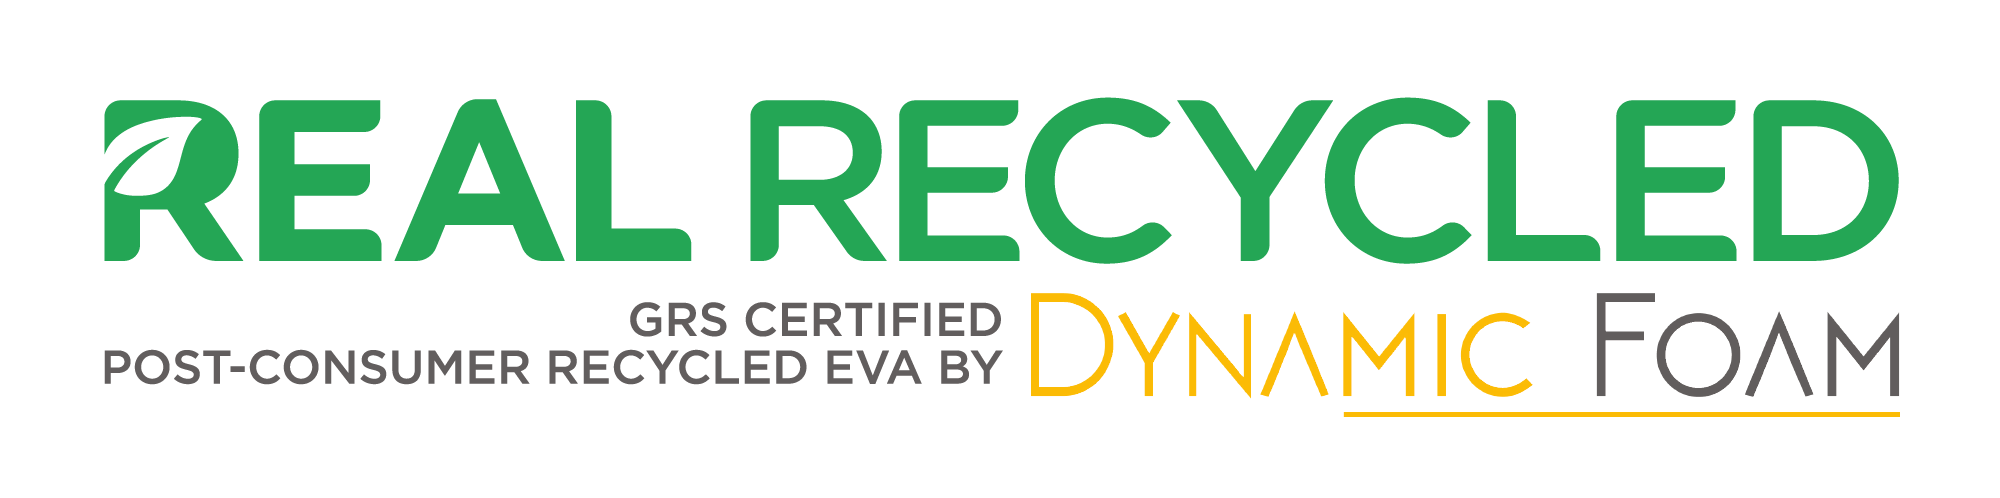 Real Recycled logo